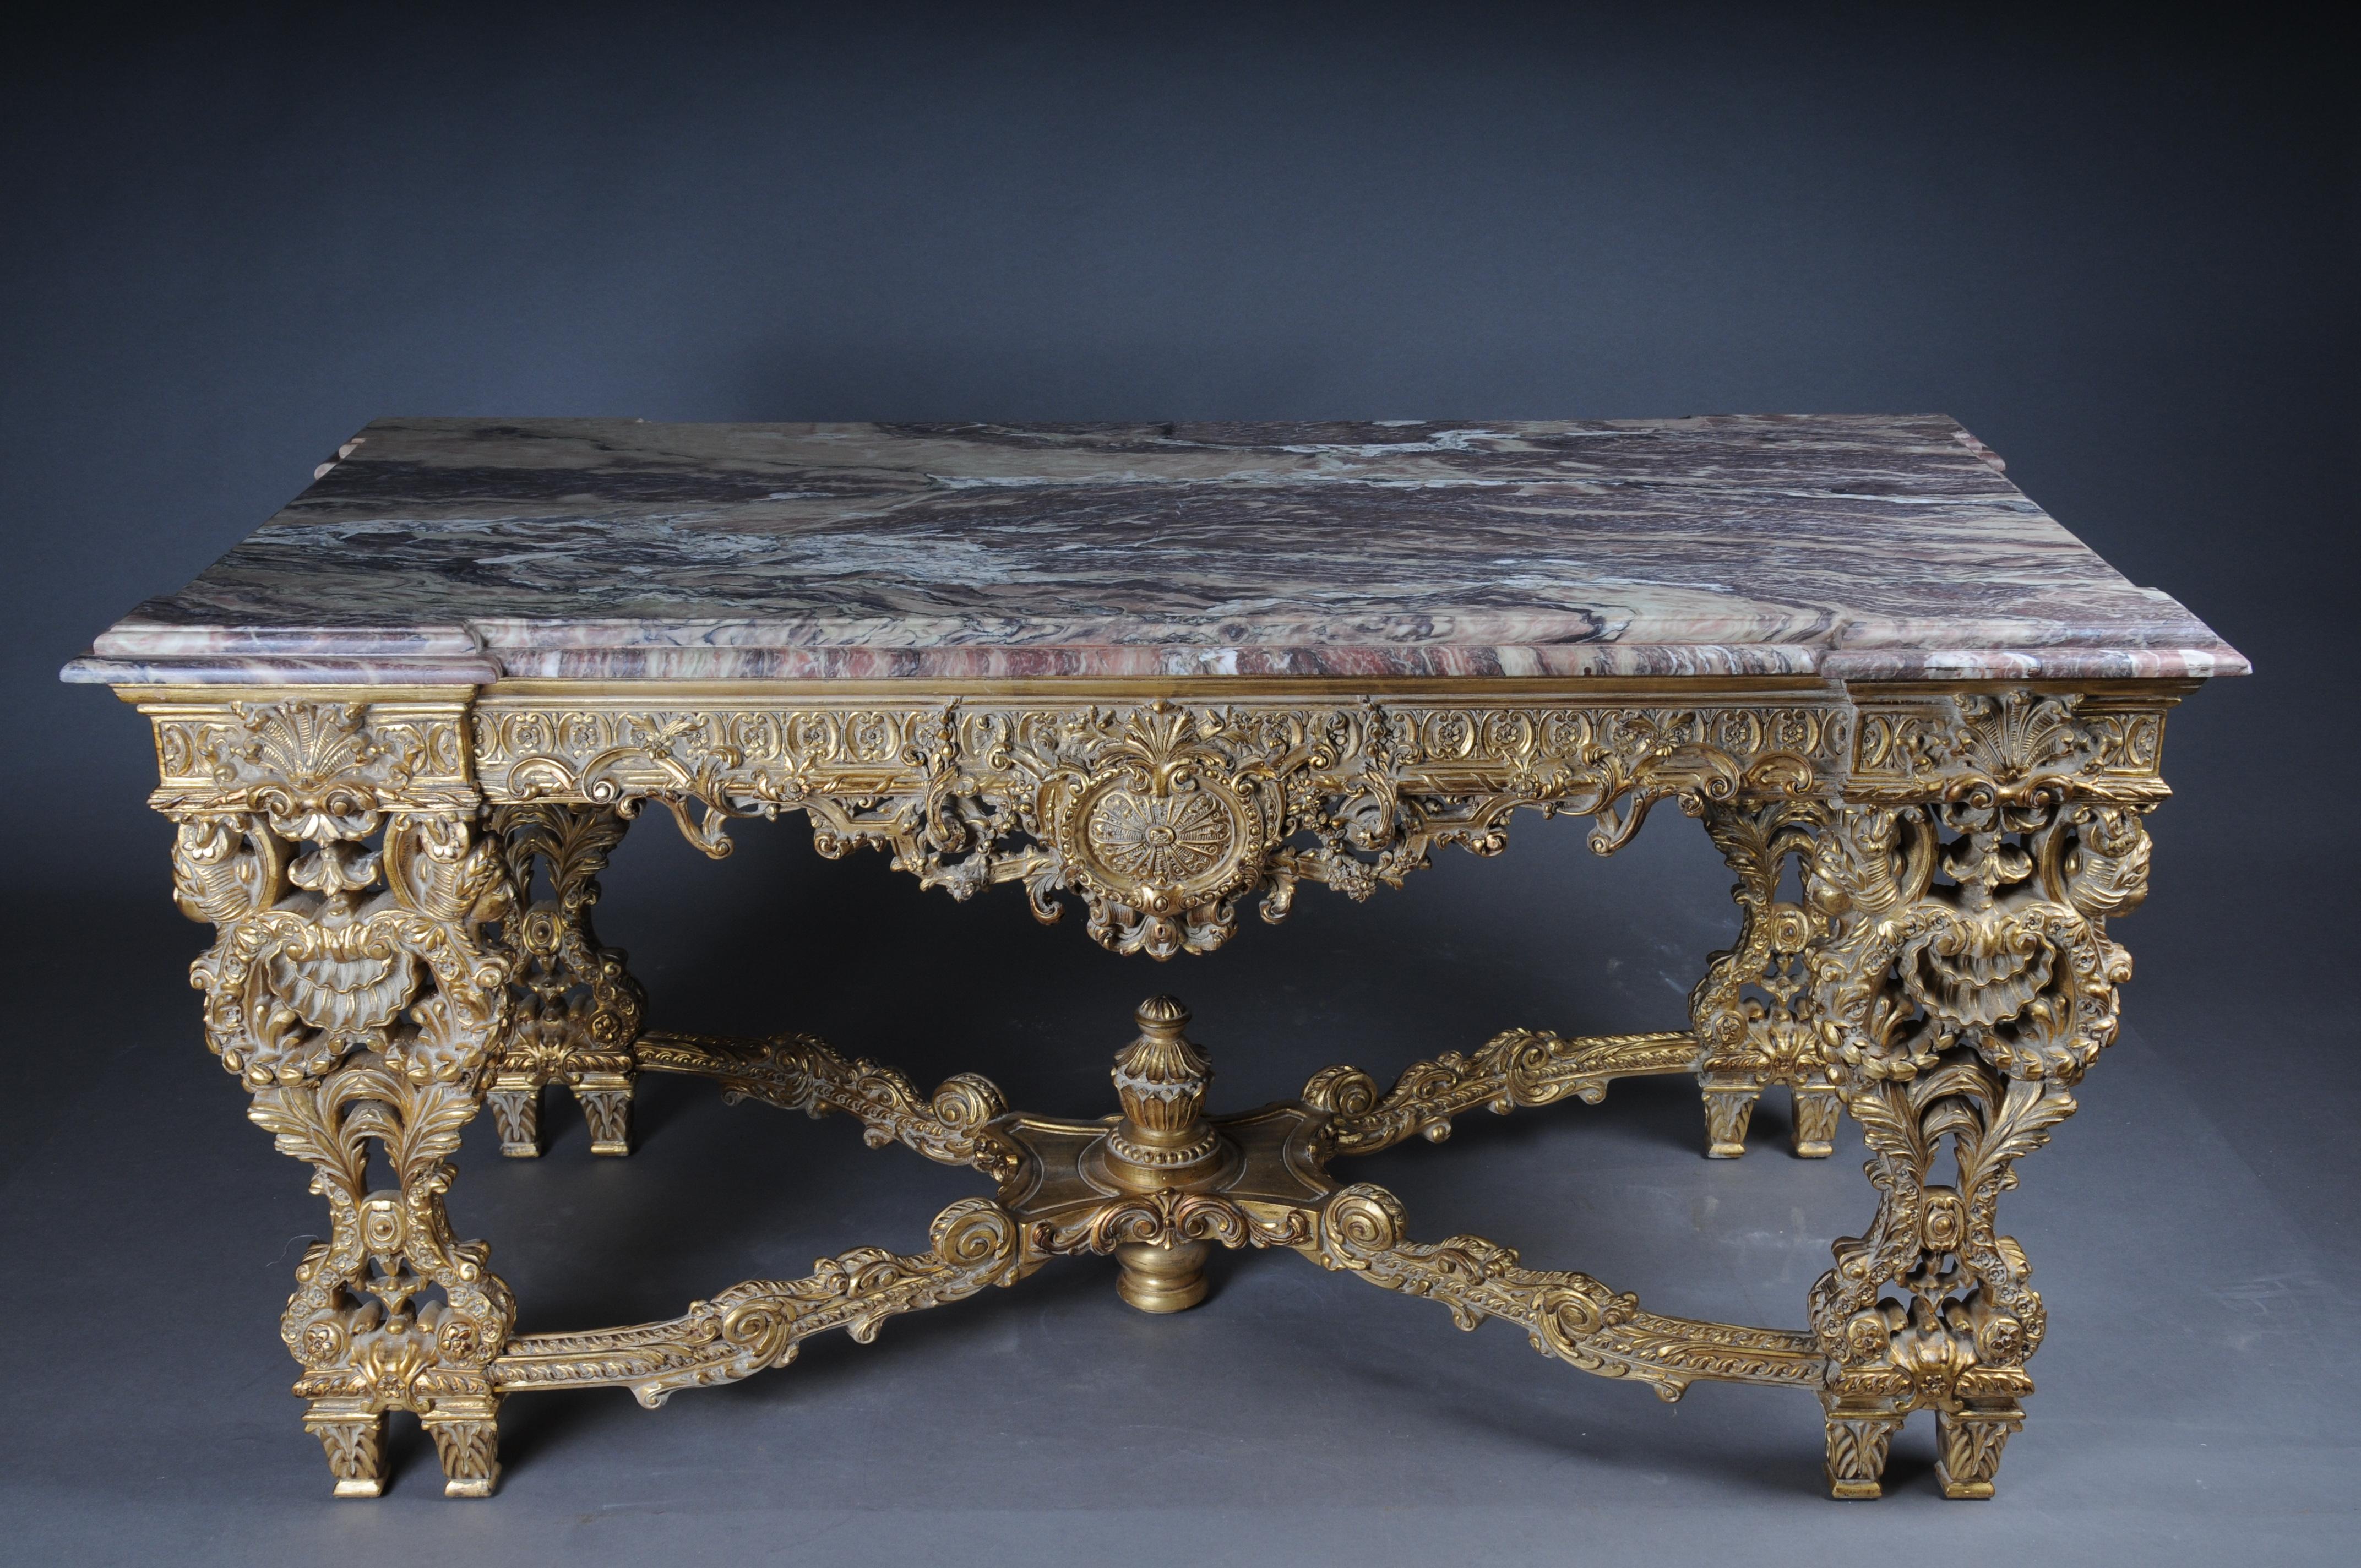 Monumental, Impressive Splendid-Salon-Table after Francois Linke

Monumental, impressive Louis XVI style salon table
High-quality, solid beech wood, carved down to the smallest detail. Very noble and finely gilded. Multiple, carved legs, connected